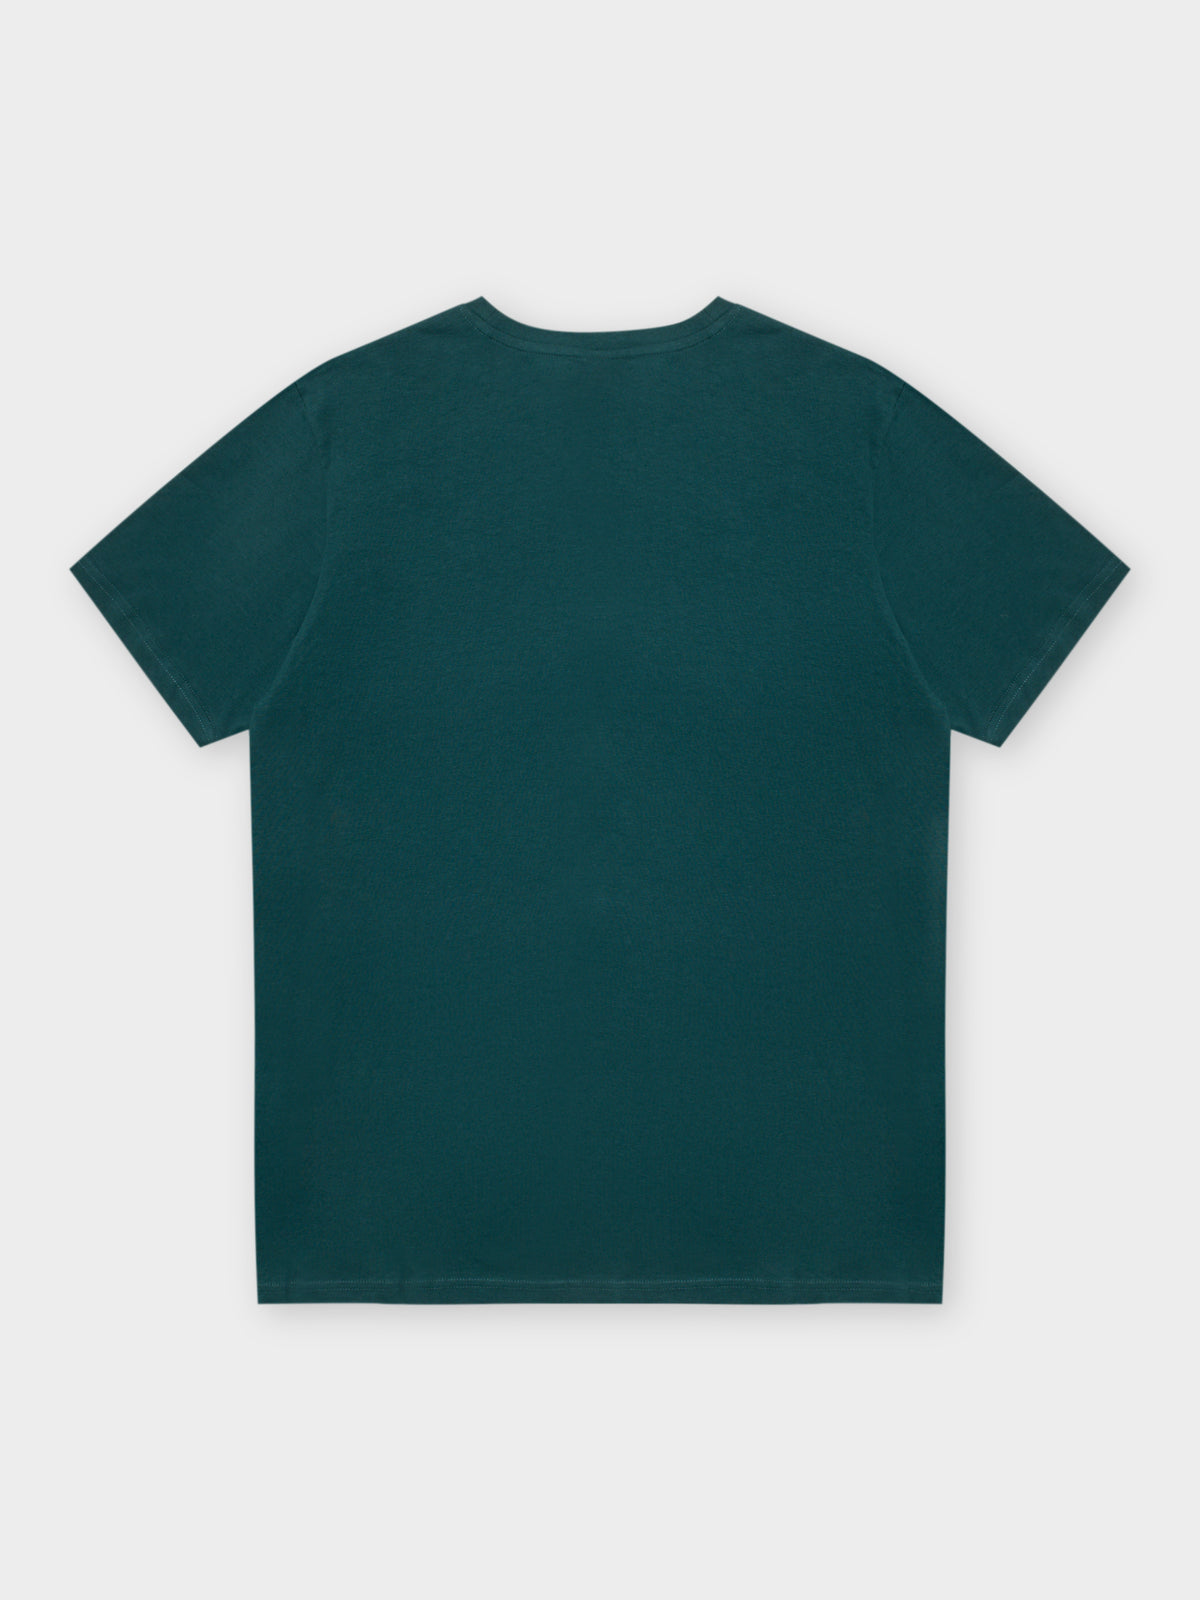 Authentic Damian T-Shirt in Green